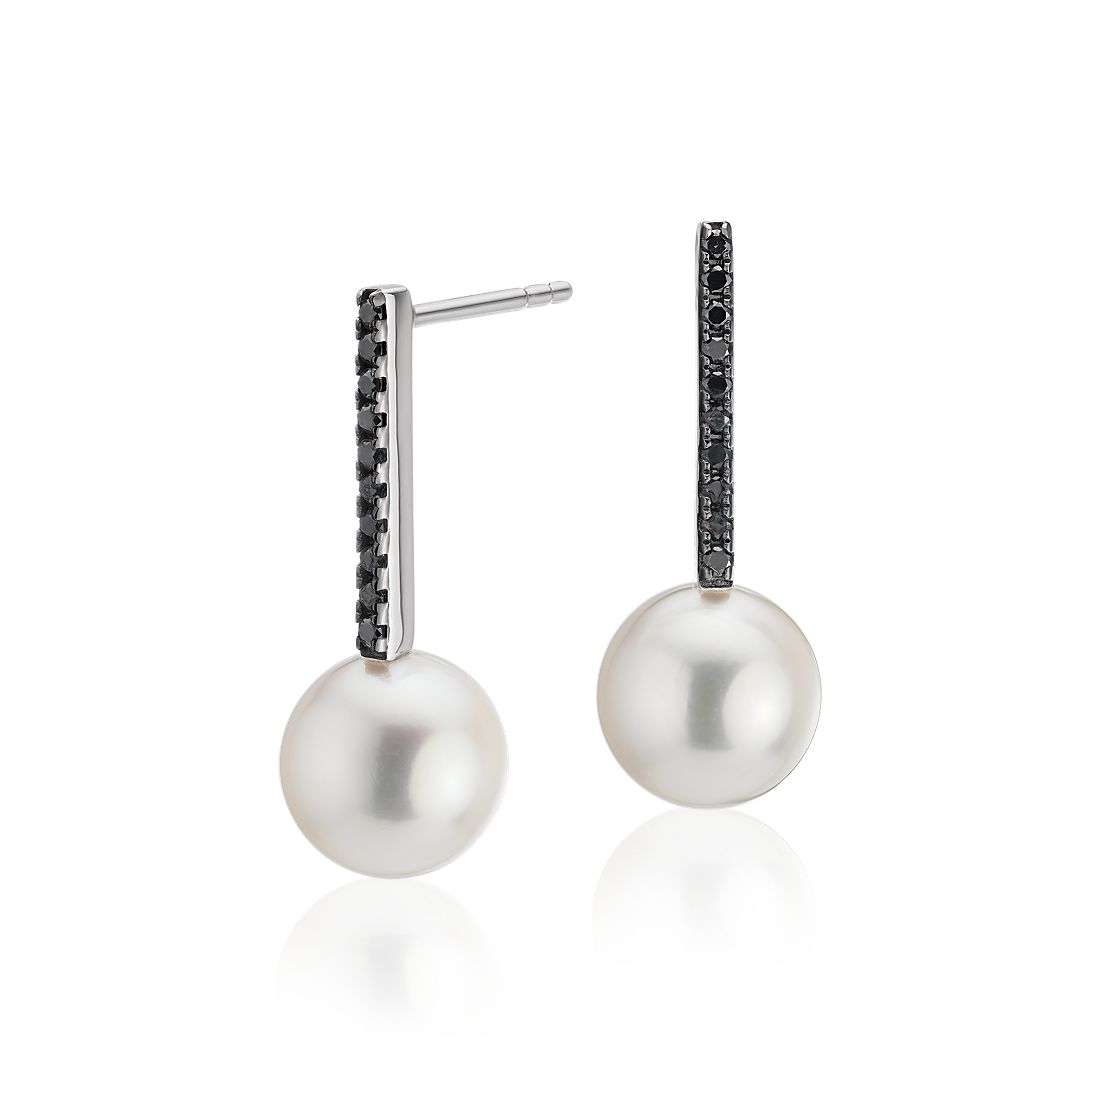 Freshwater Cultured Pearl Earrings and Black Diamond Drop by Blue Nile